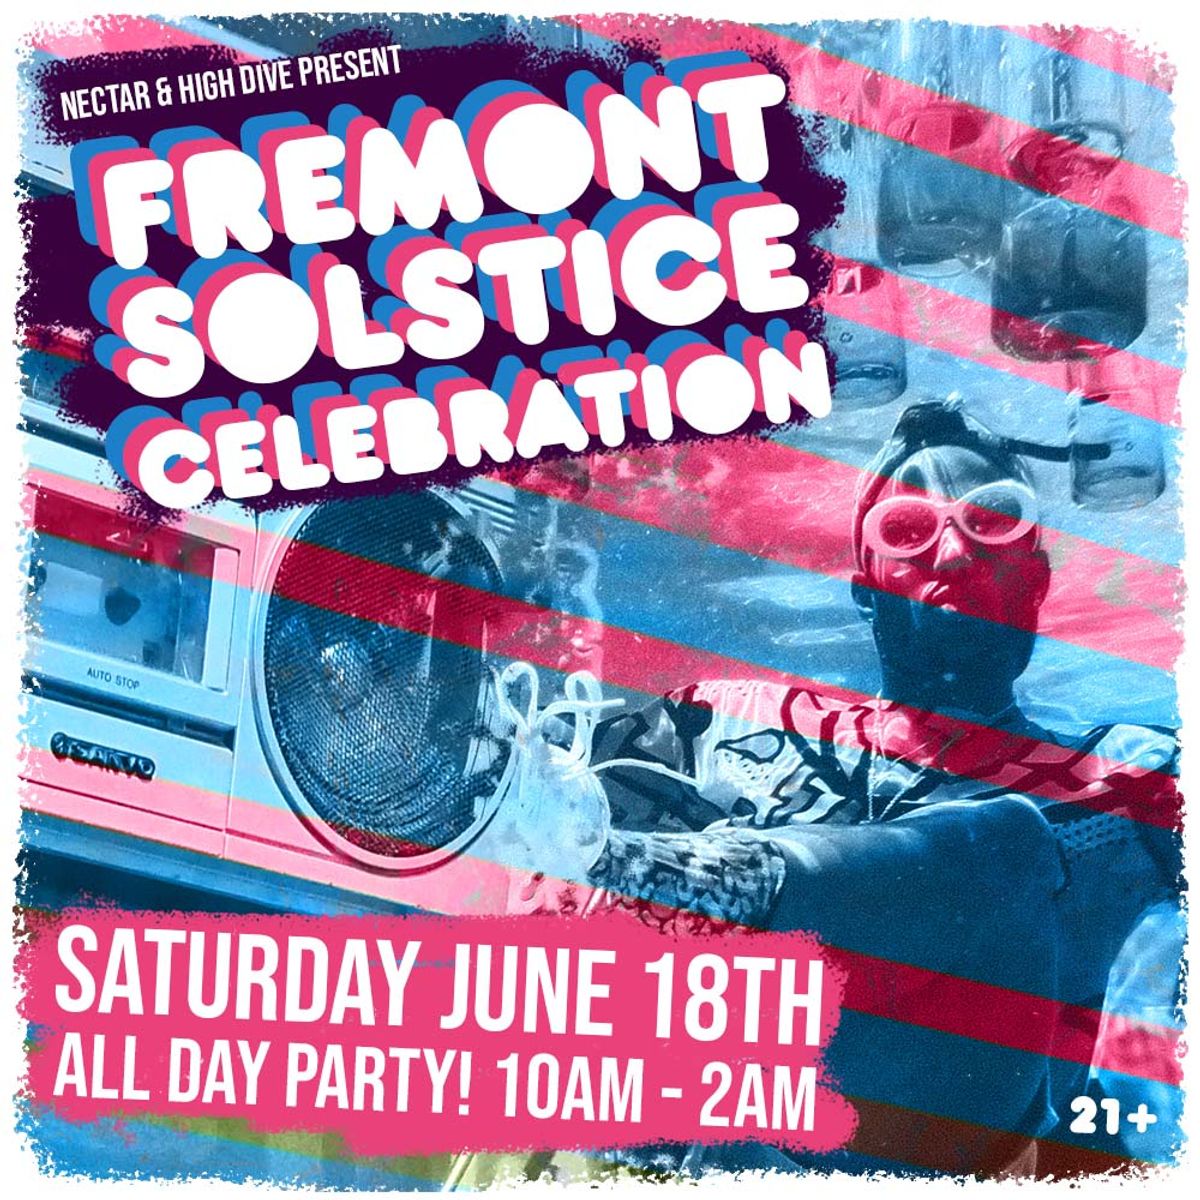 Fremont Solstice Celebration at Nectar & High Dive at Nectar in Seattle